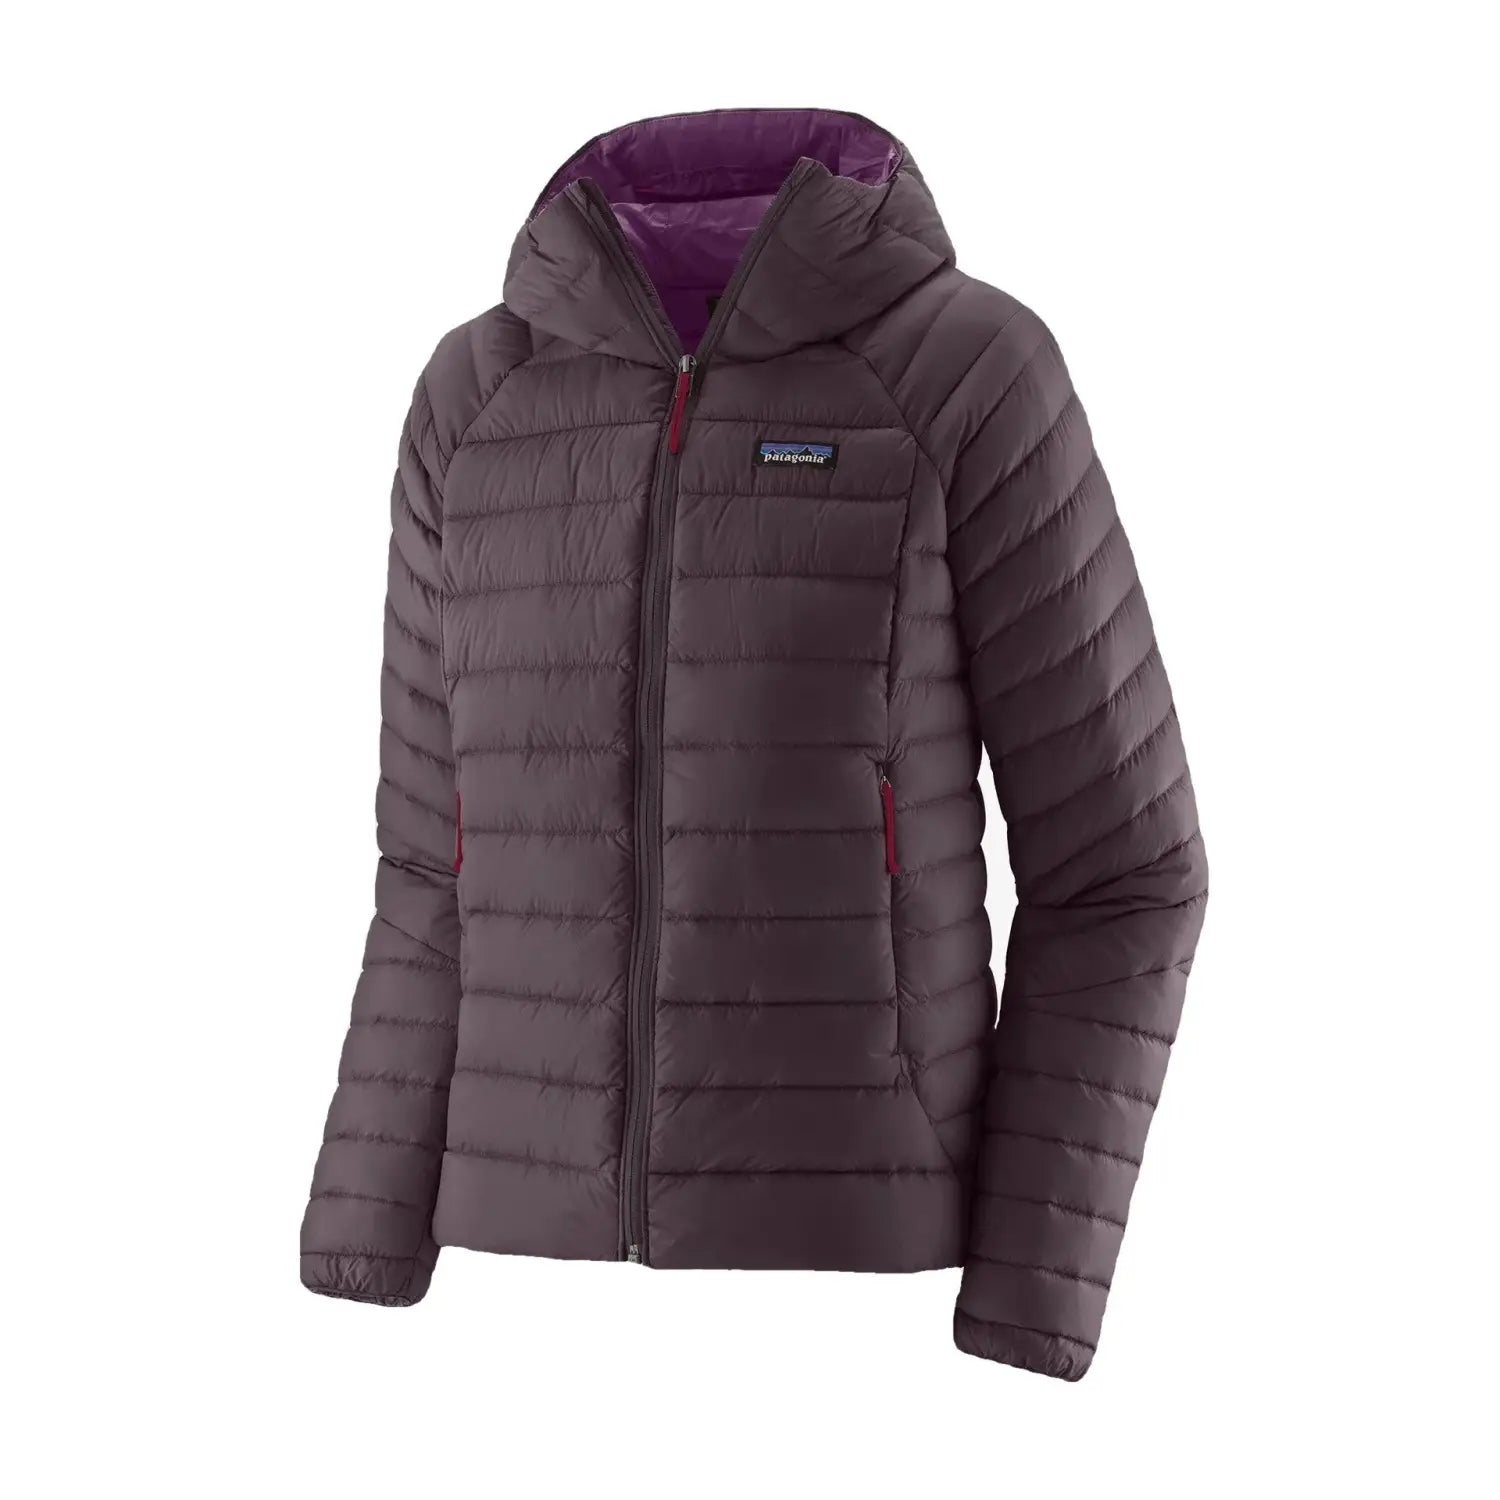 Patagonia W's Down Sweater Hoody, Obsidian Plum, front view 